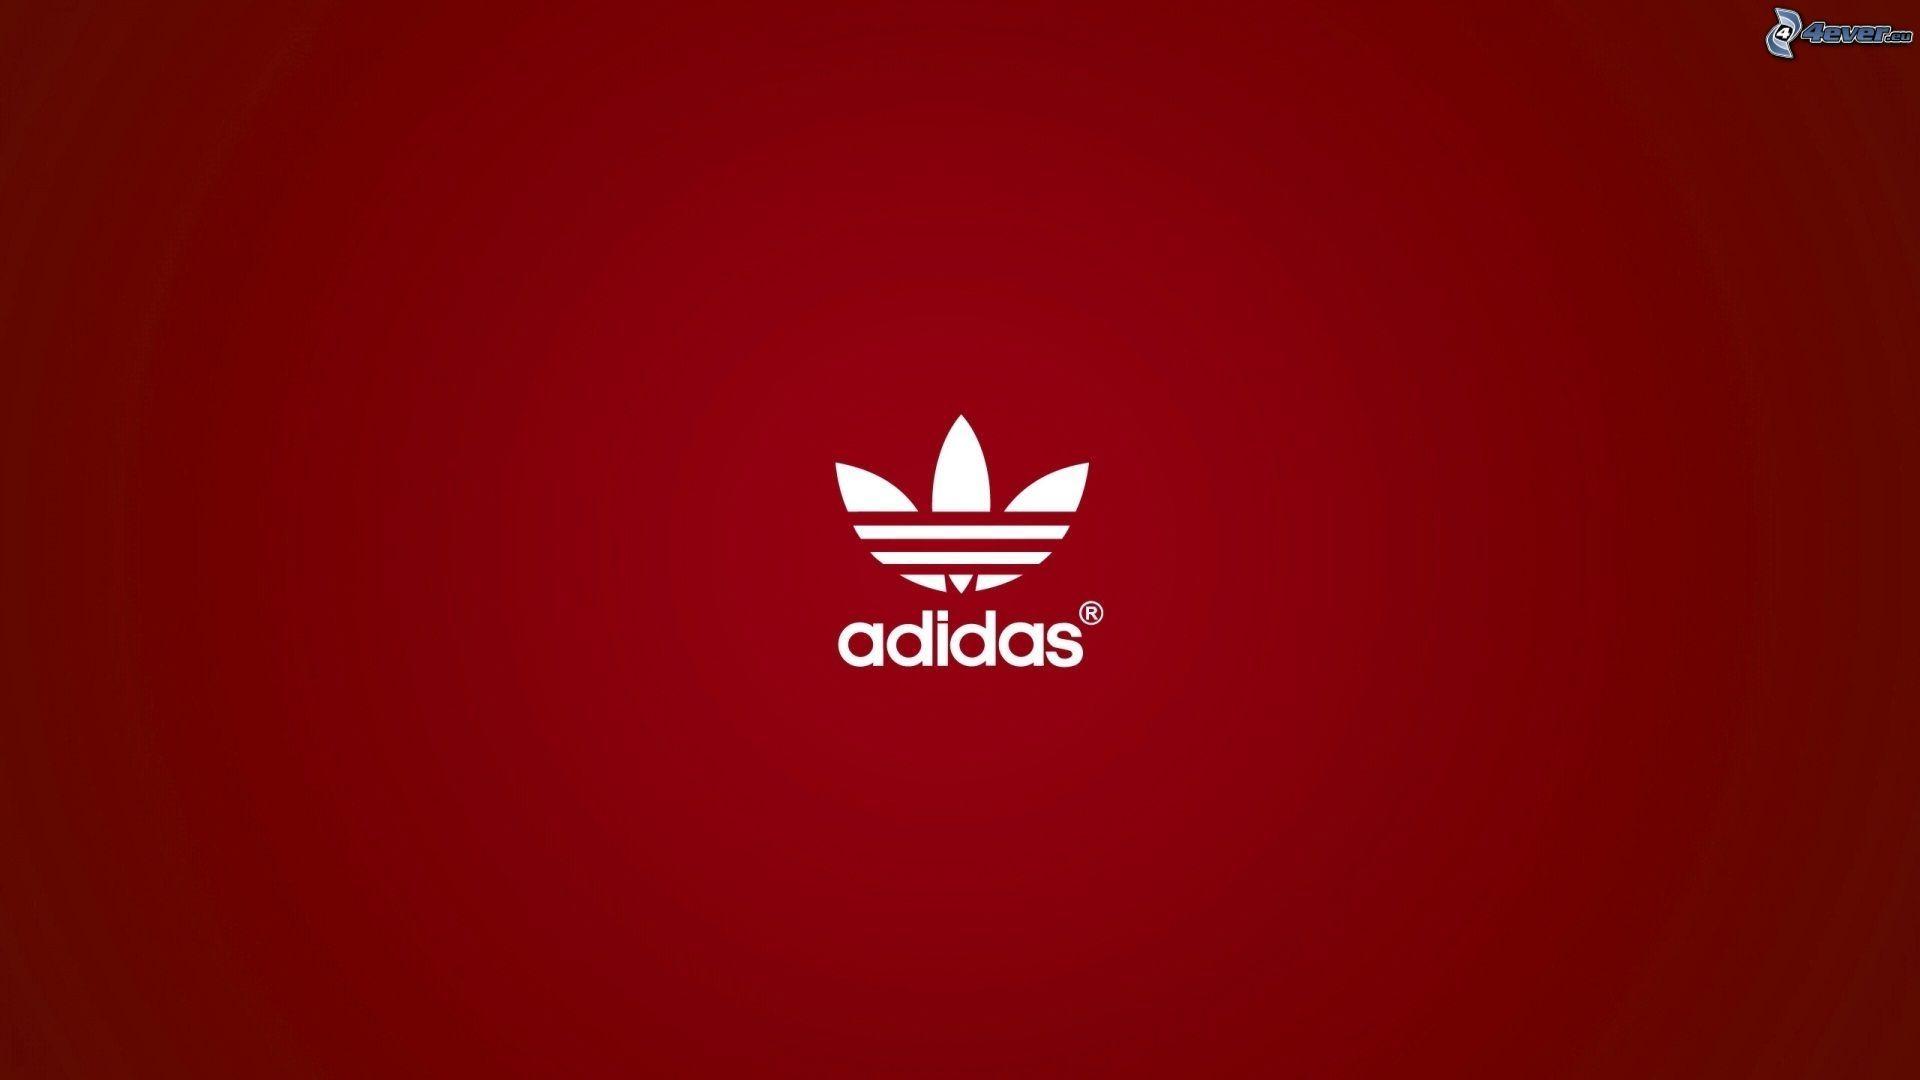 Wallpapers adidas hd red